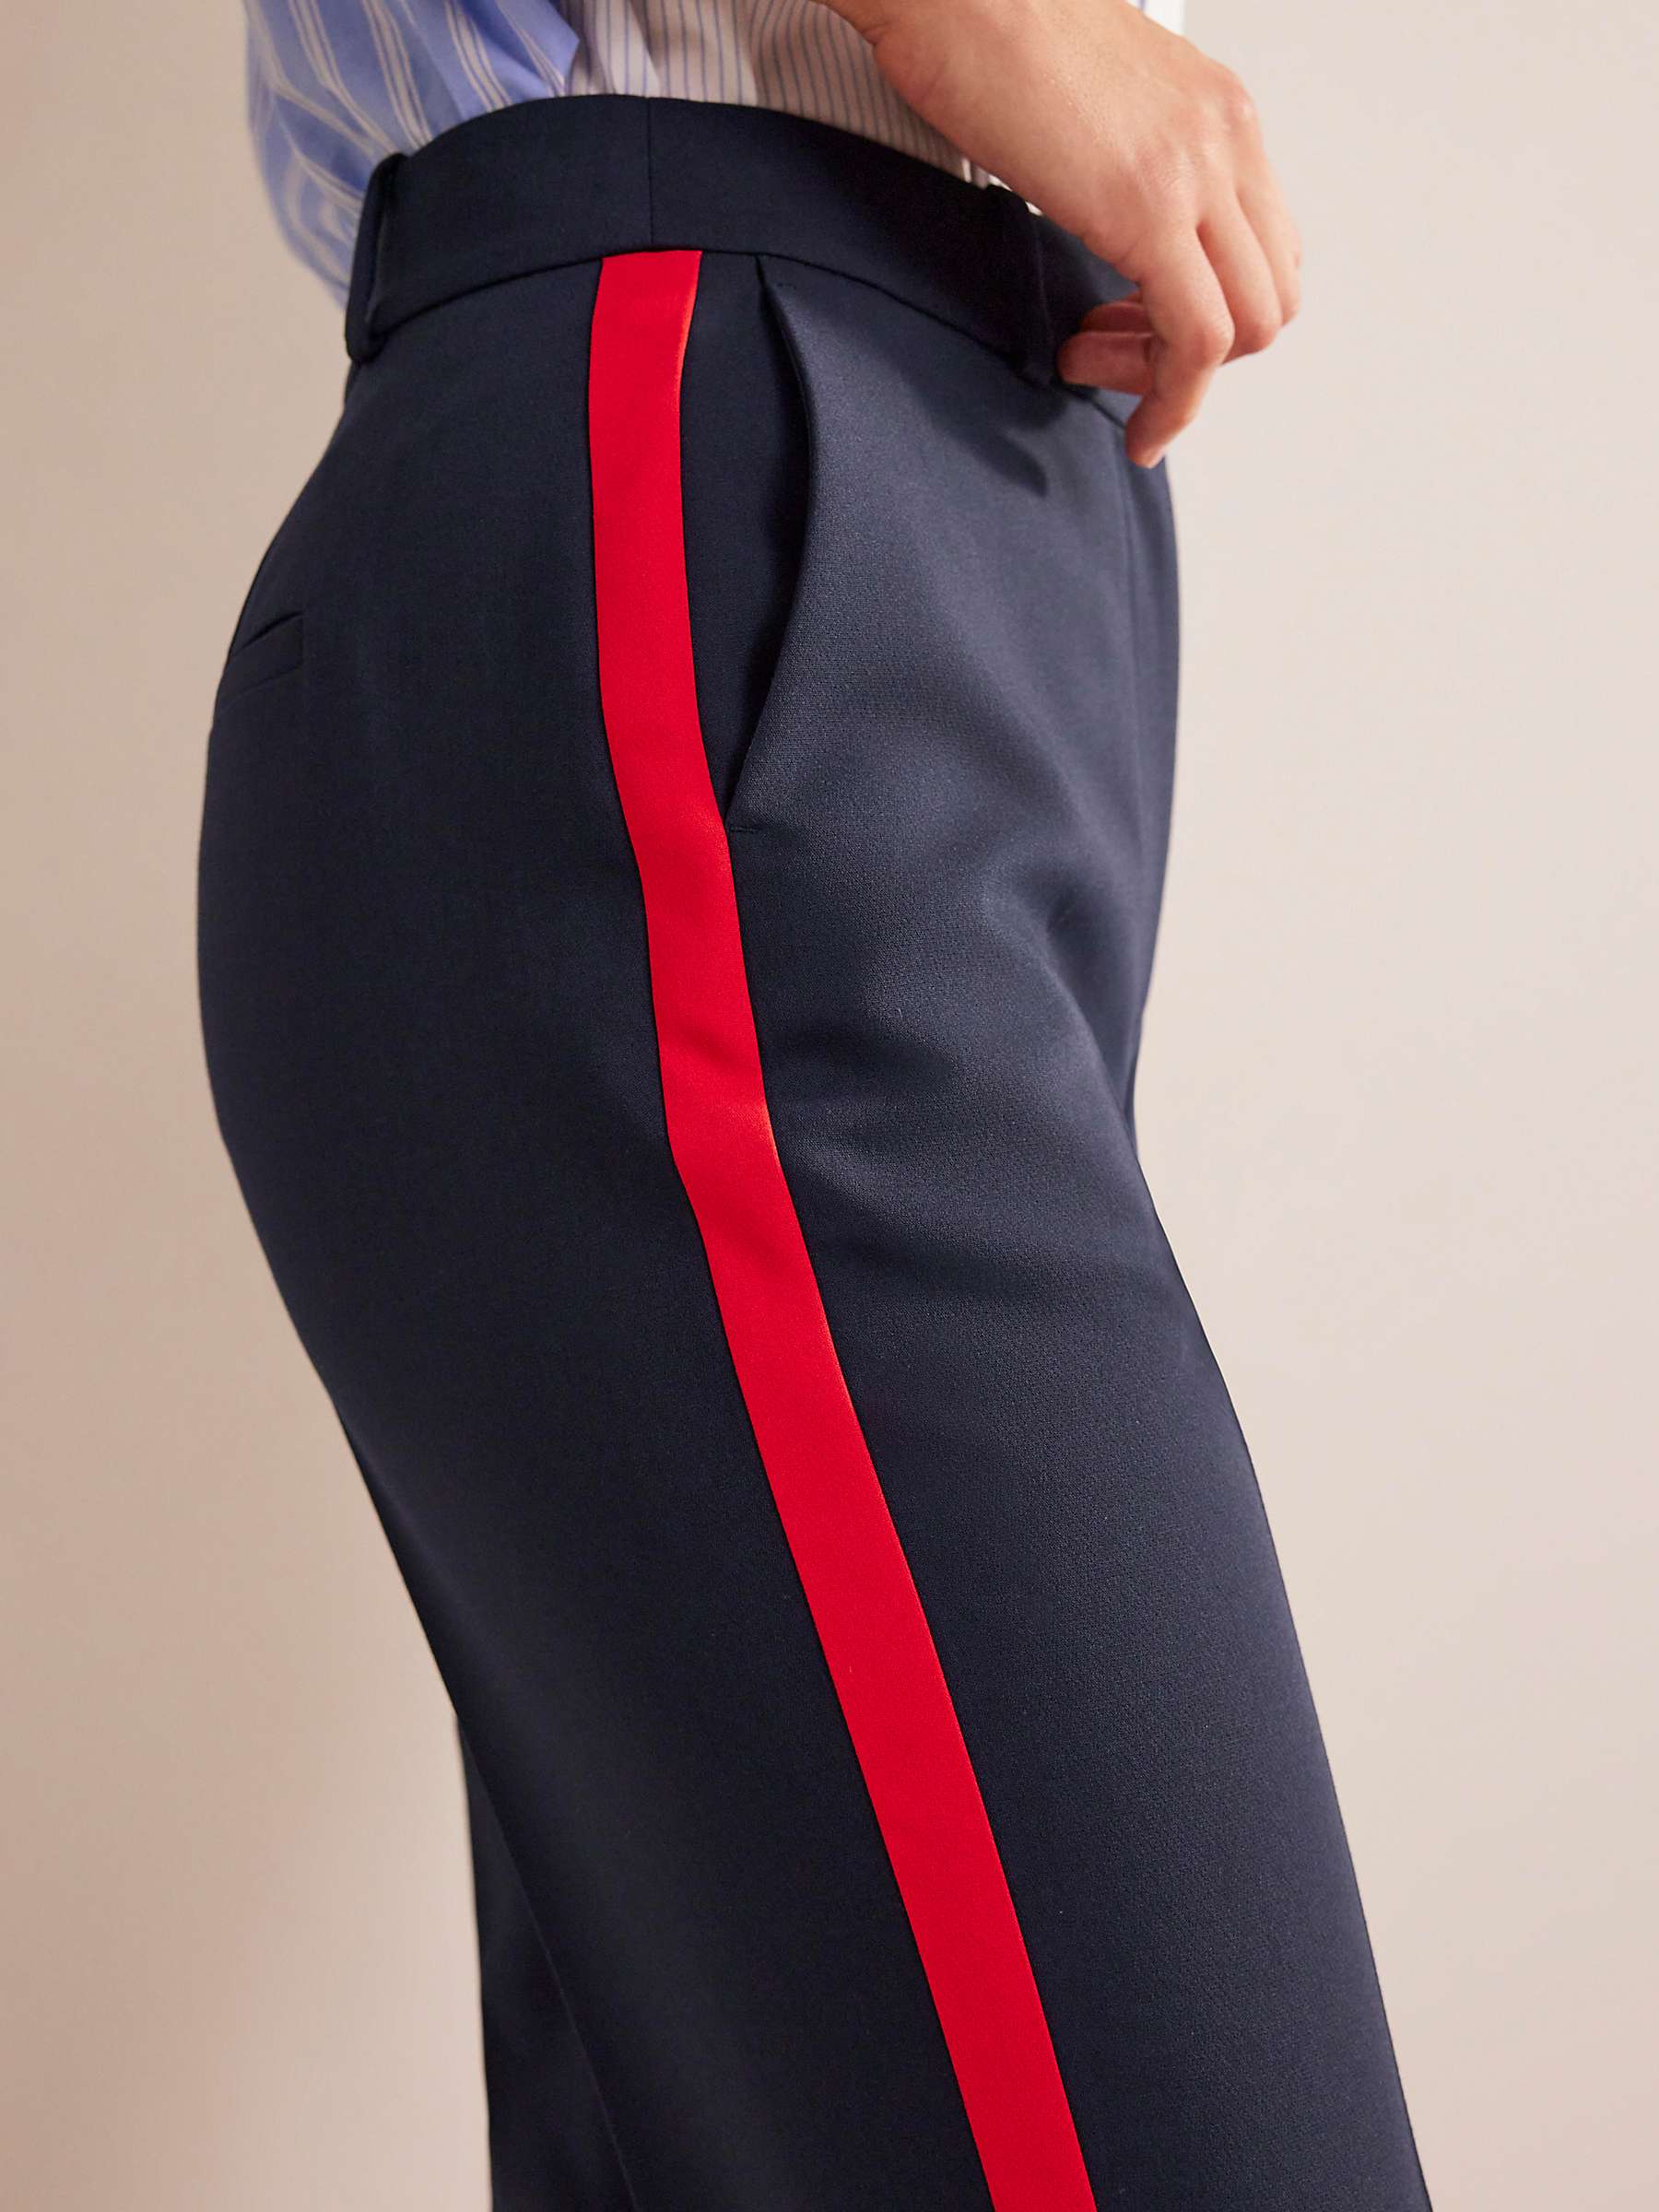 Buy Boden Kew Side Stripe Tapered Trousers, Navy/Red Online at johnlewis.com